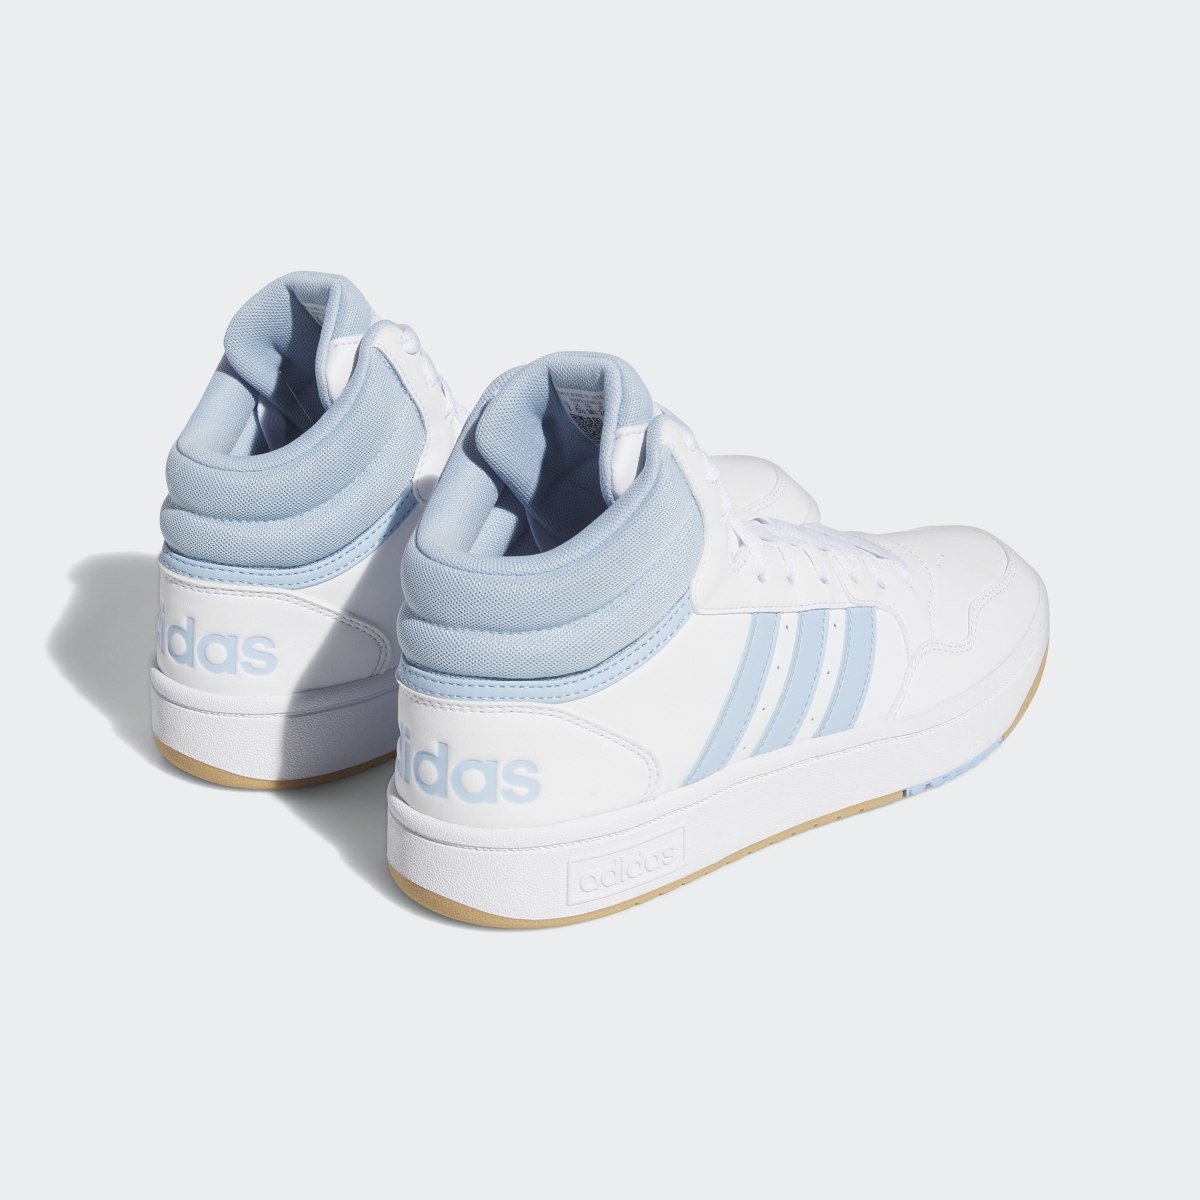 Adidas Hoops 3.0 Mid Shoes. 6